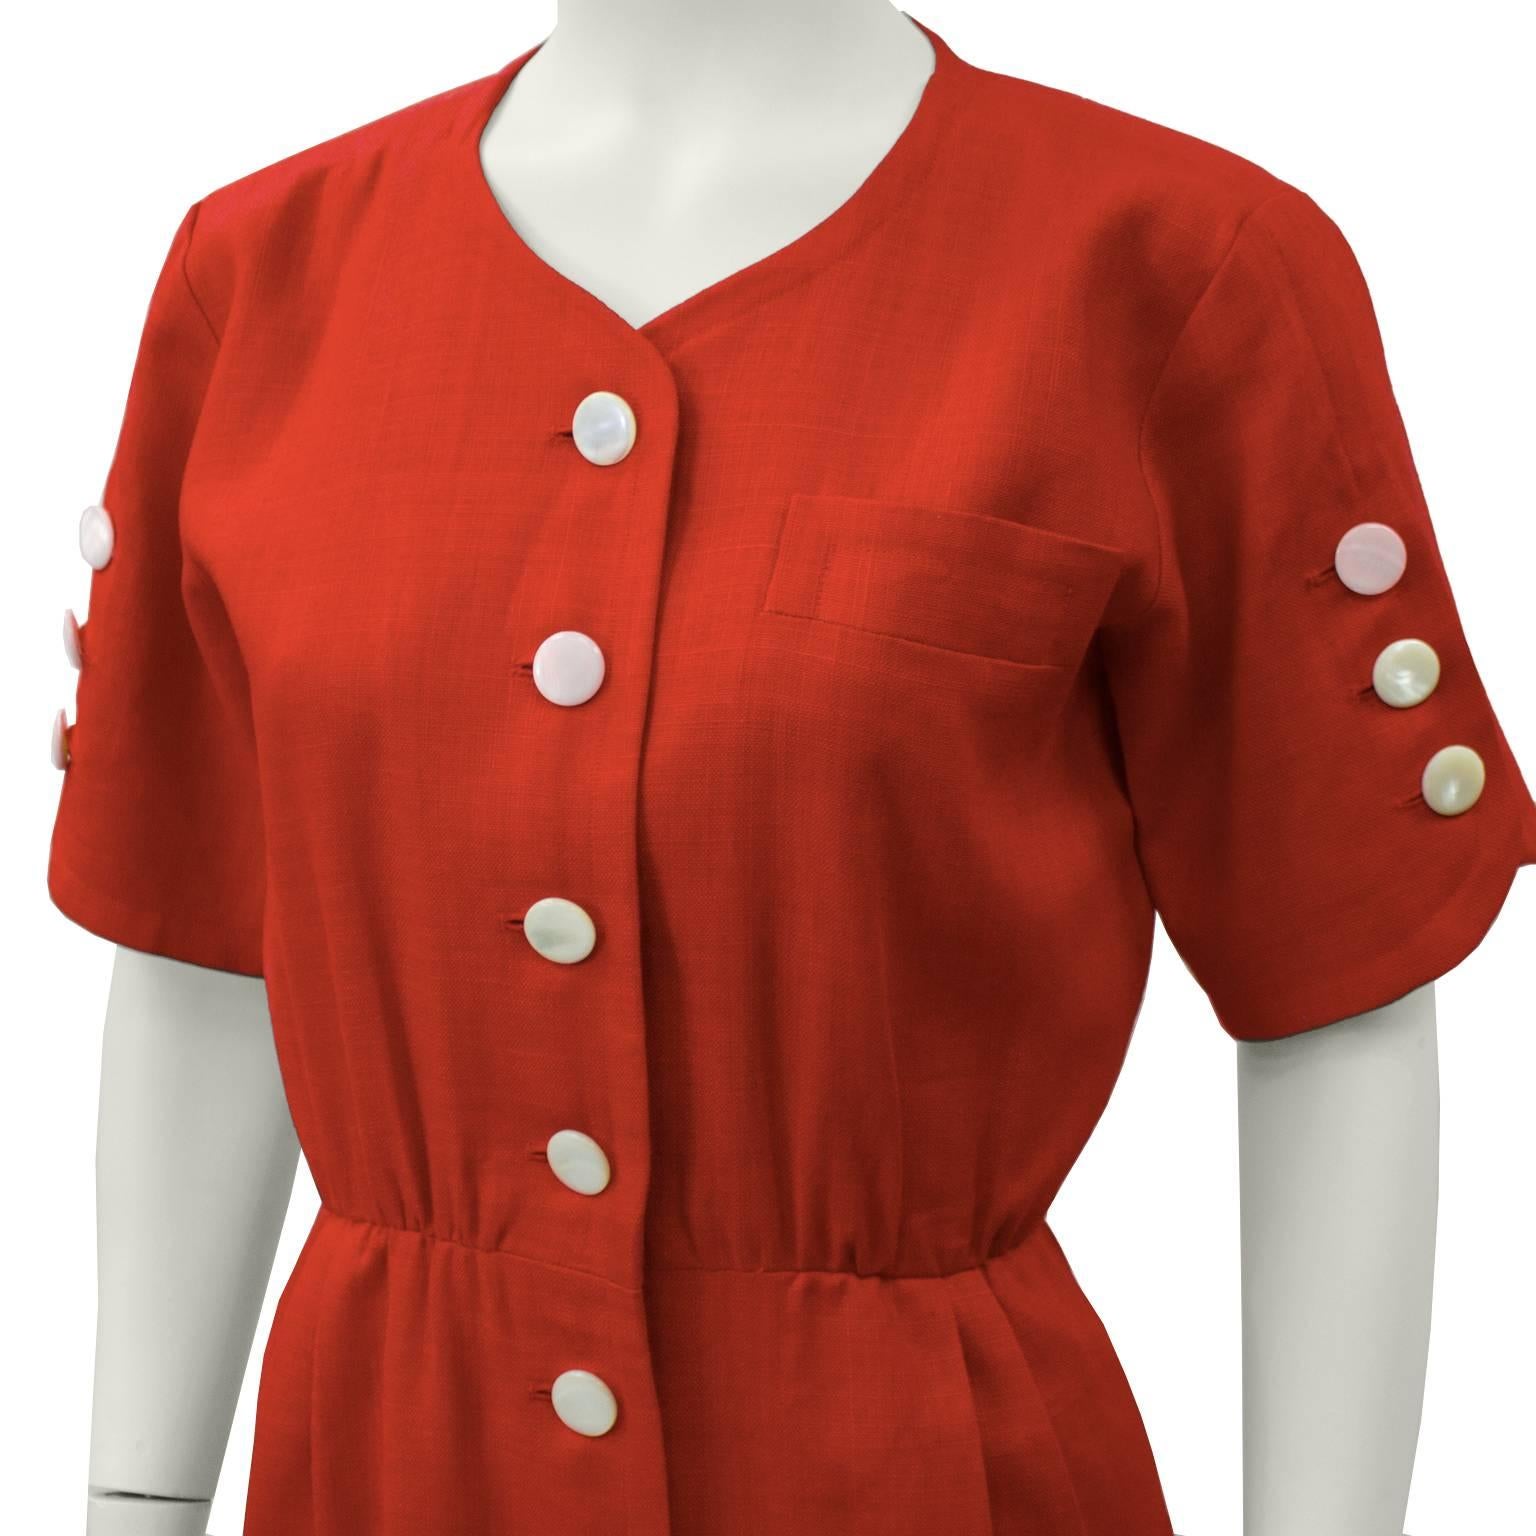 Women's 1980's Yves Saint Laurent YSL Red Linen Dress with White Buttons